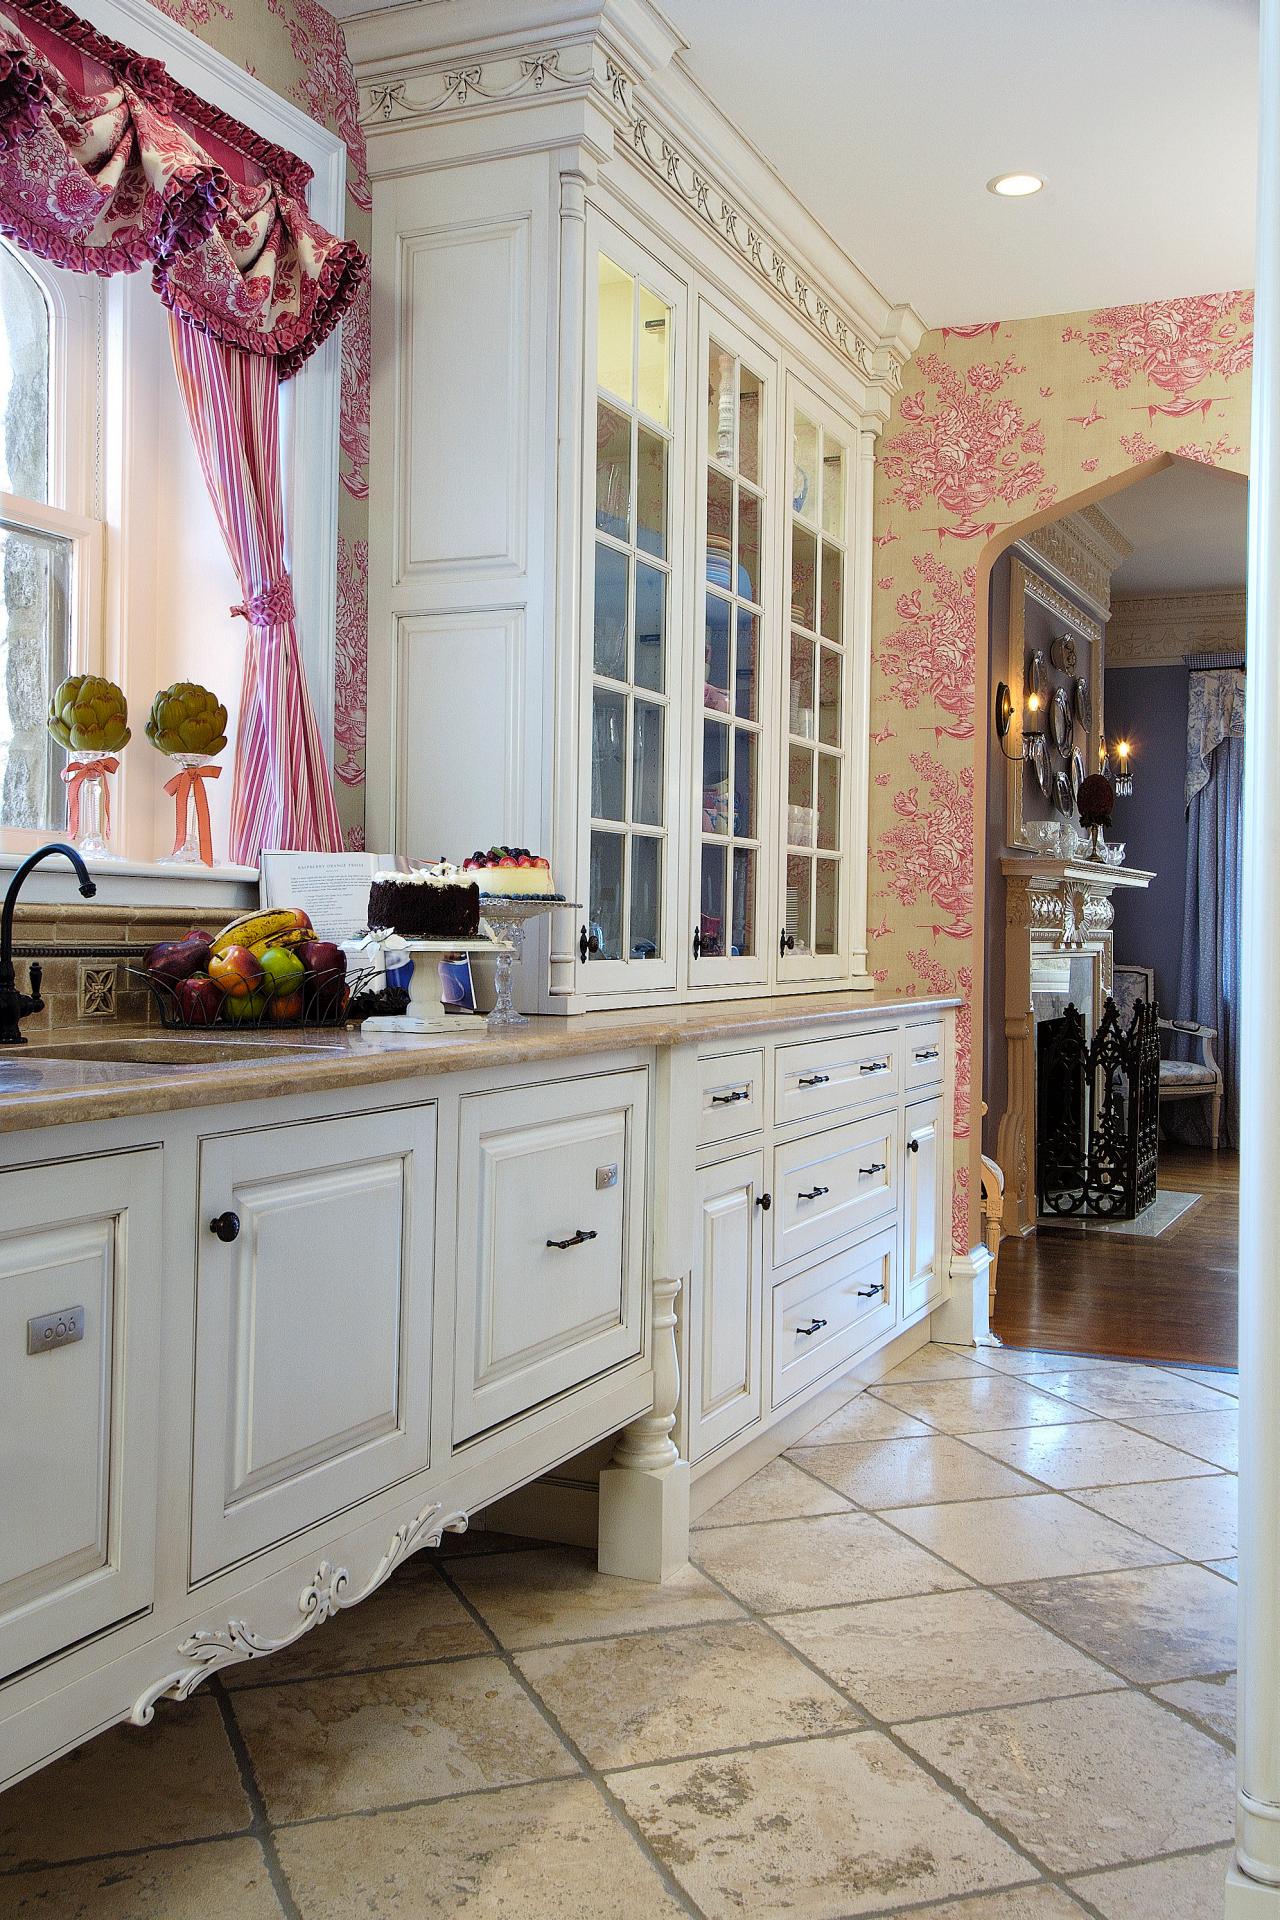 Lovely Feminine Kitchen With Pink Floral Wallpaper - Shabby Chic Kitchen Set - HD Wallpaper 